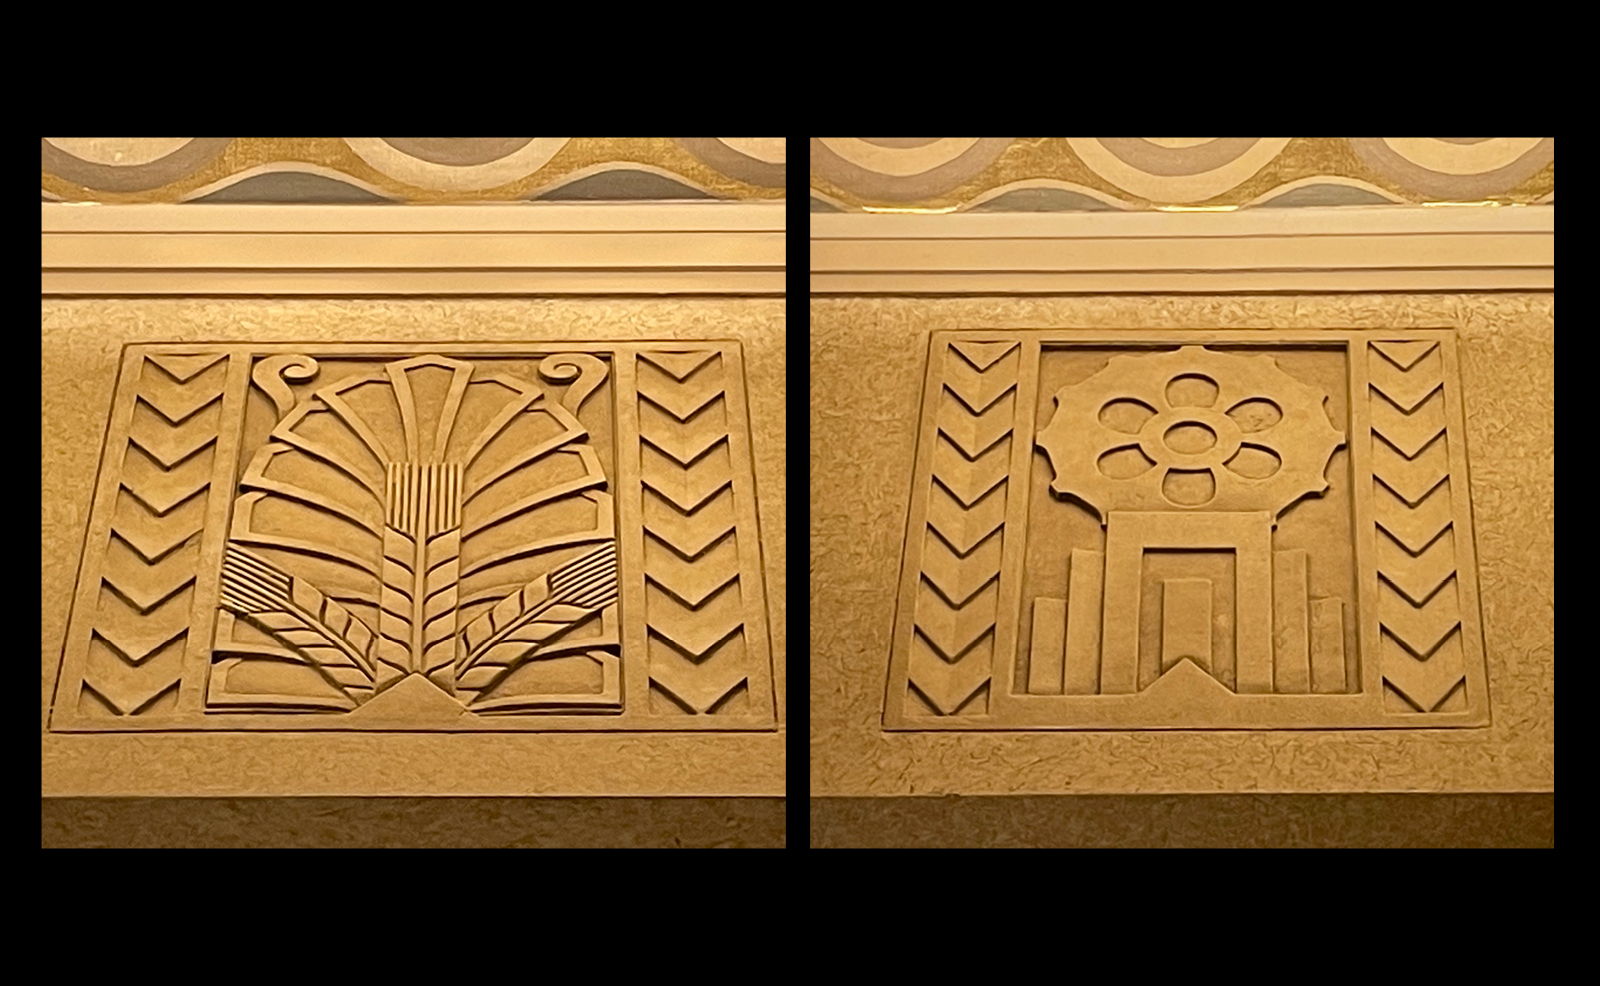 Image of ornamental moldings showing cornstalks and gears